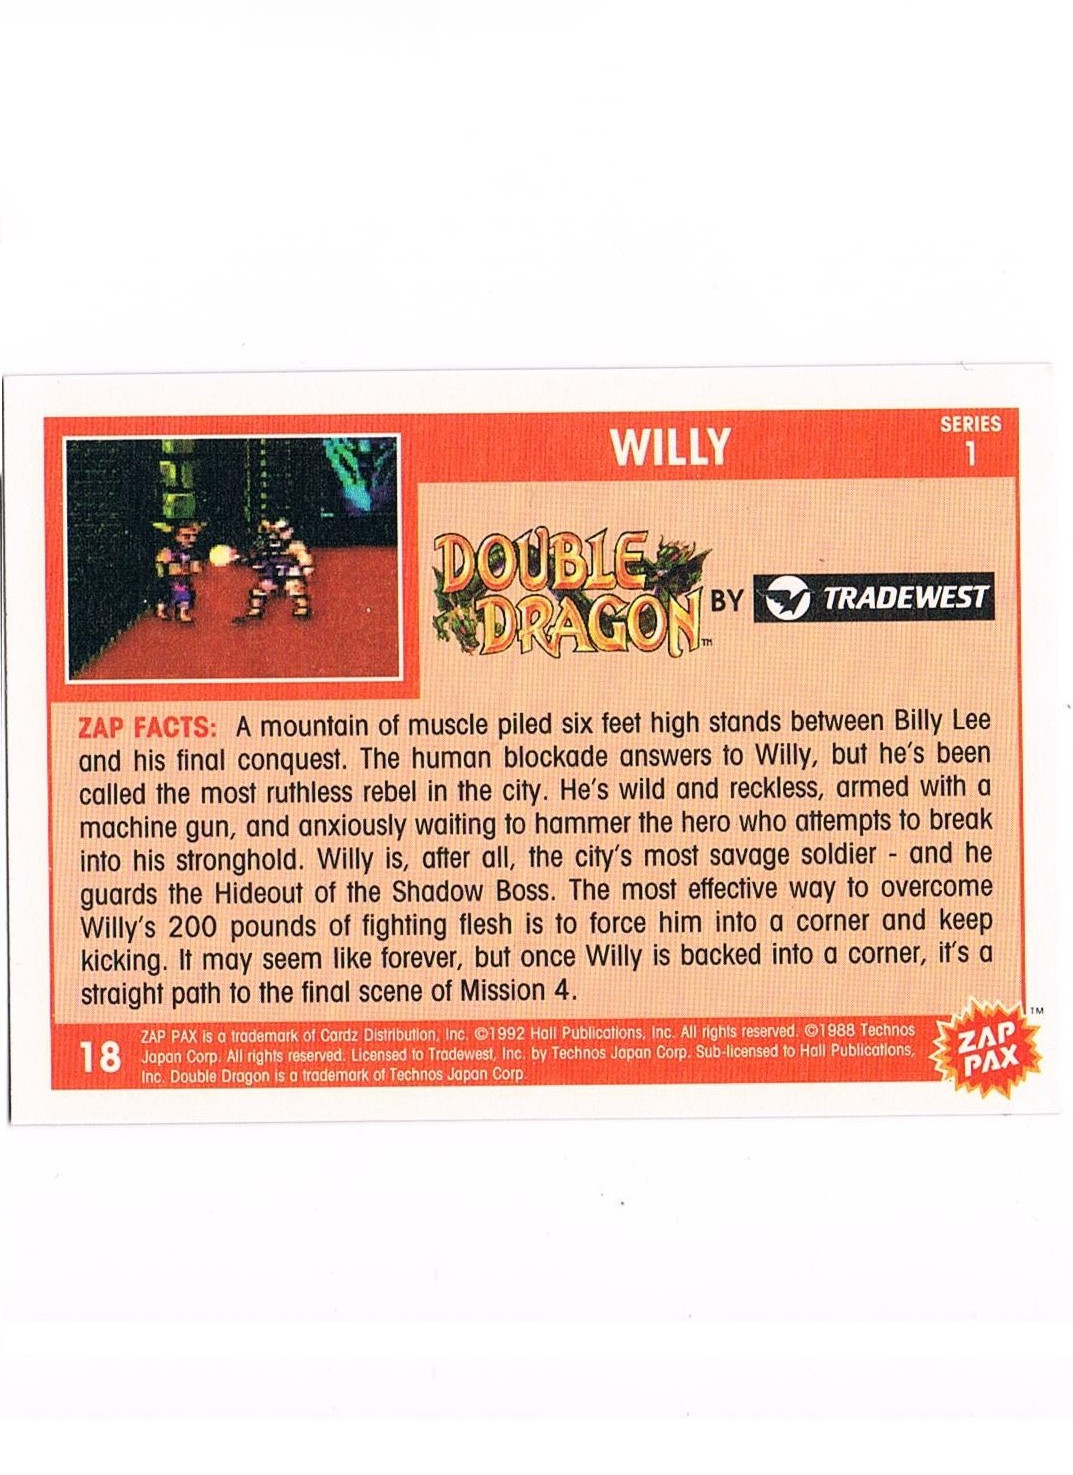 Zap Pax No. 18 - Double Dragon Willy 2